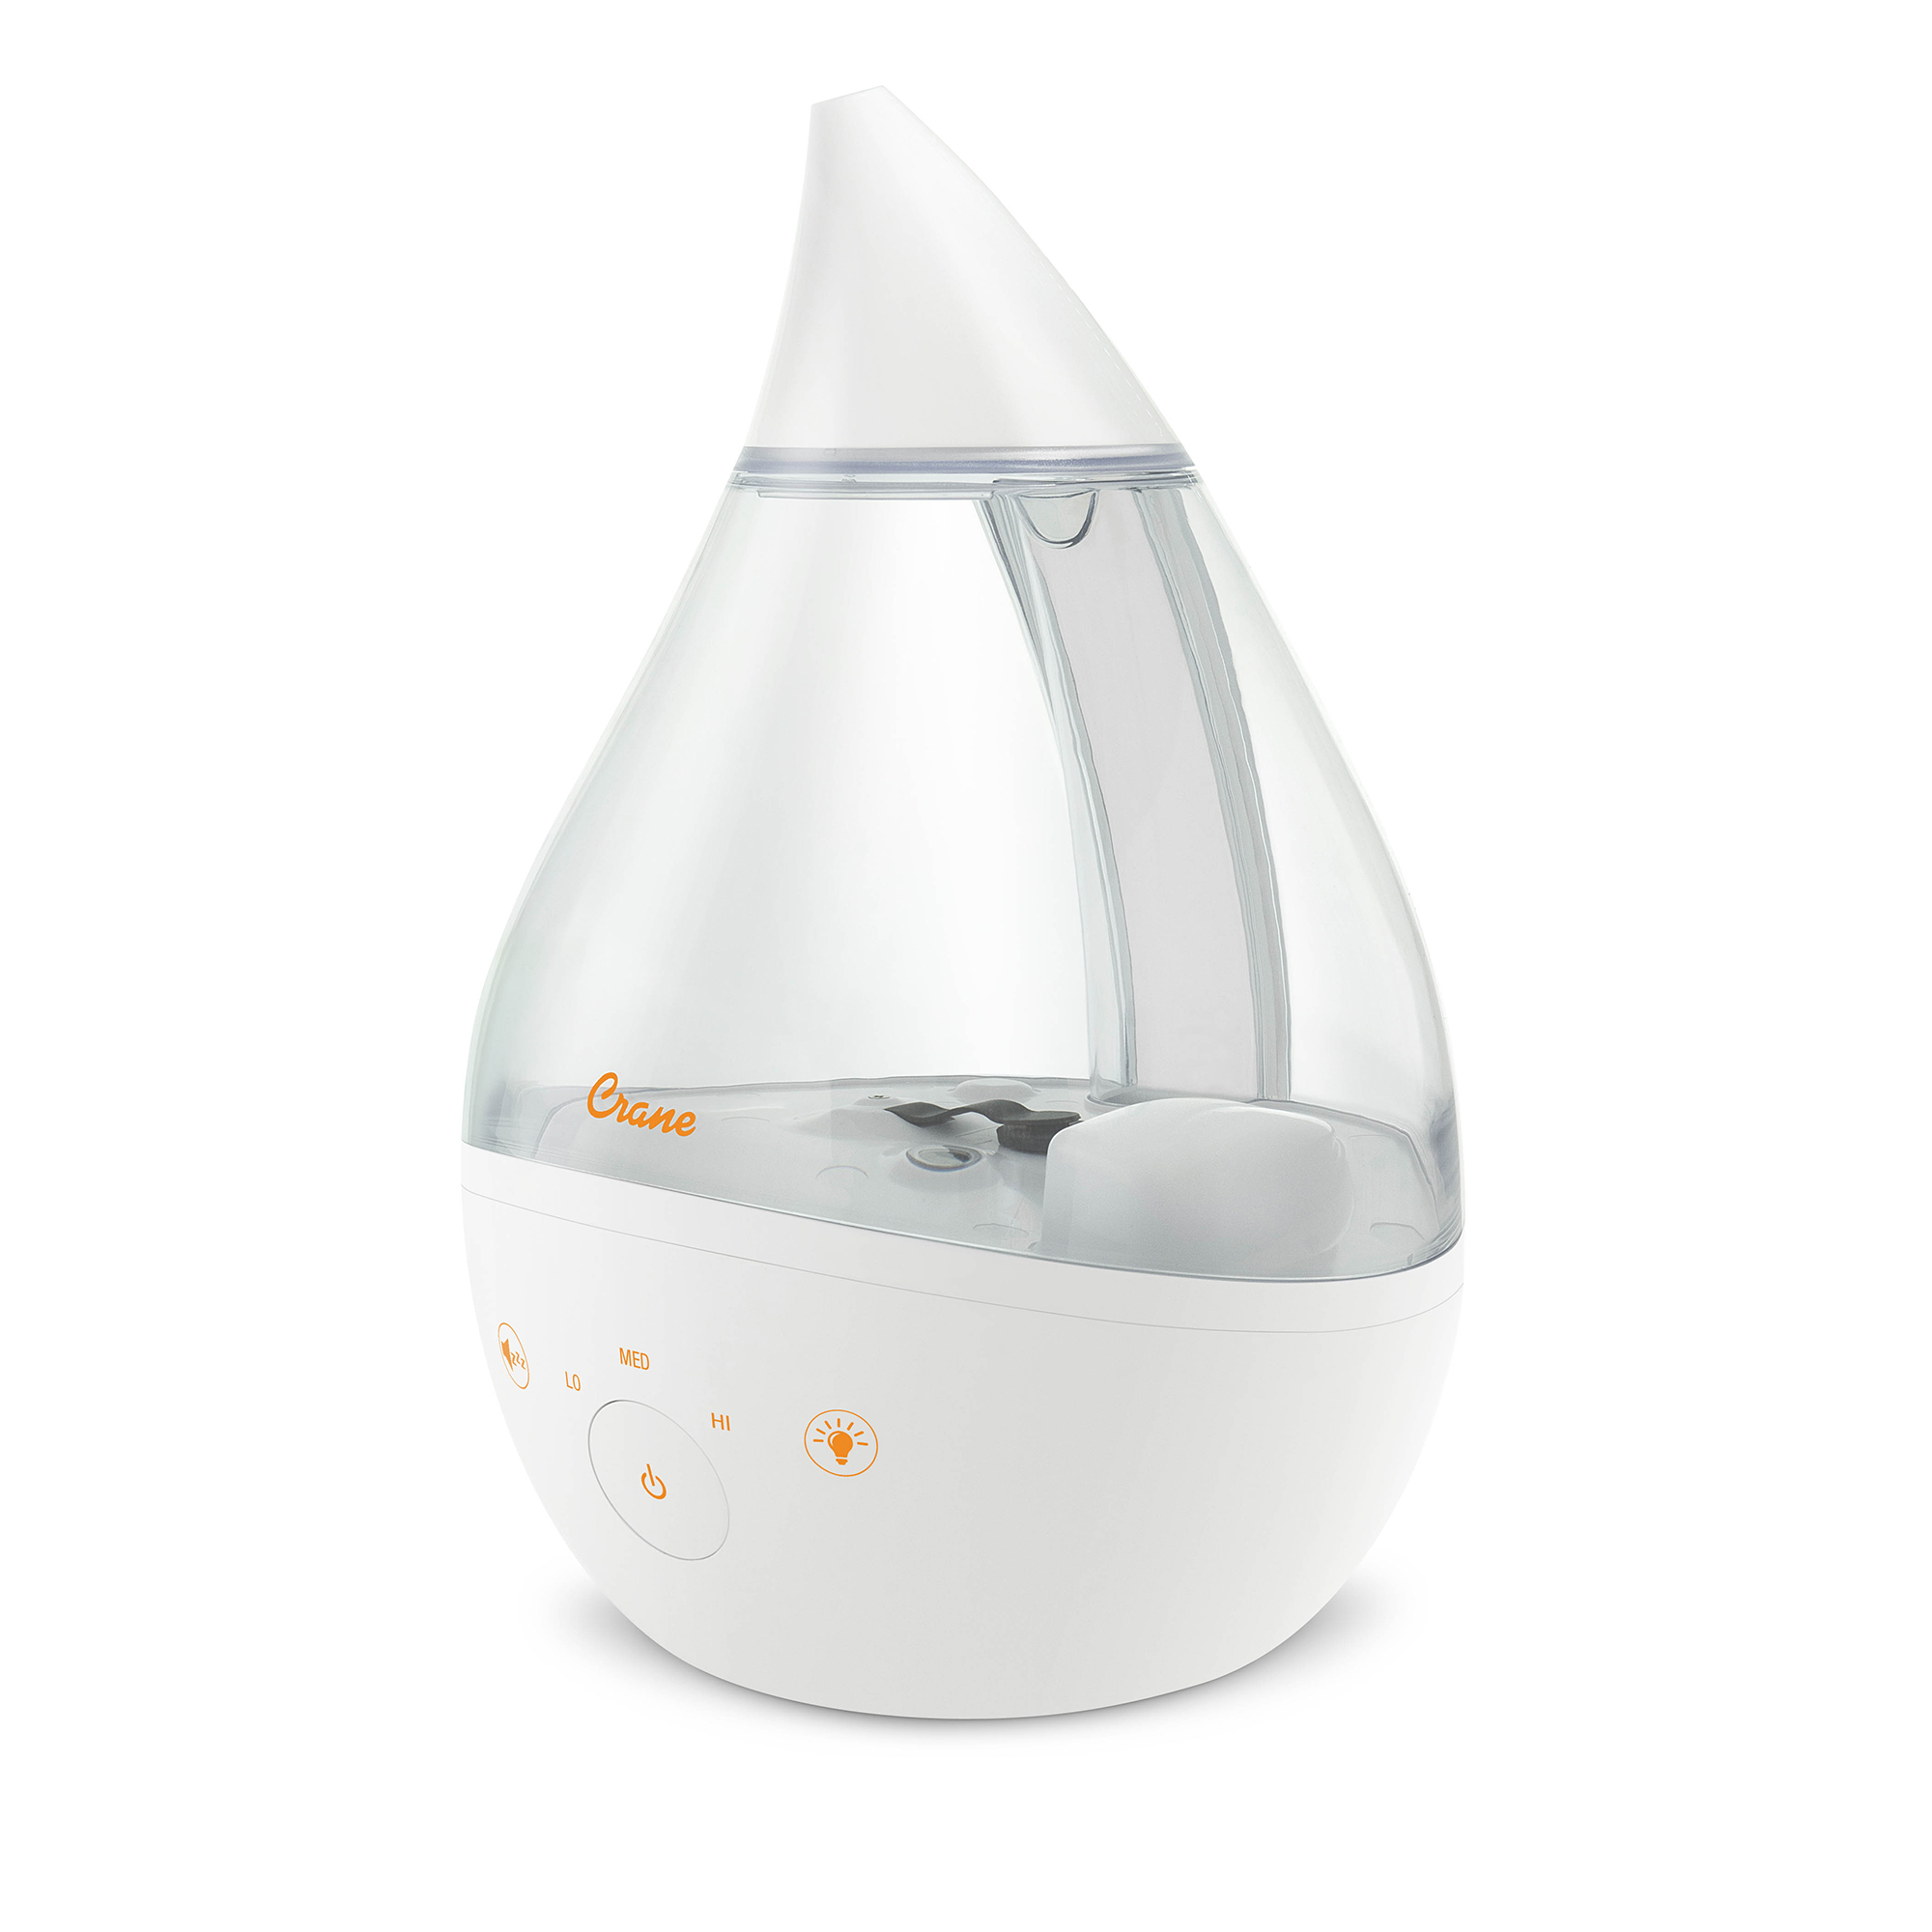 Humidifier main image on white background